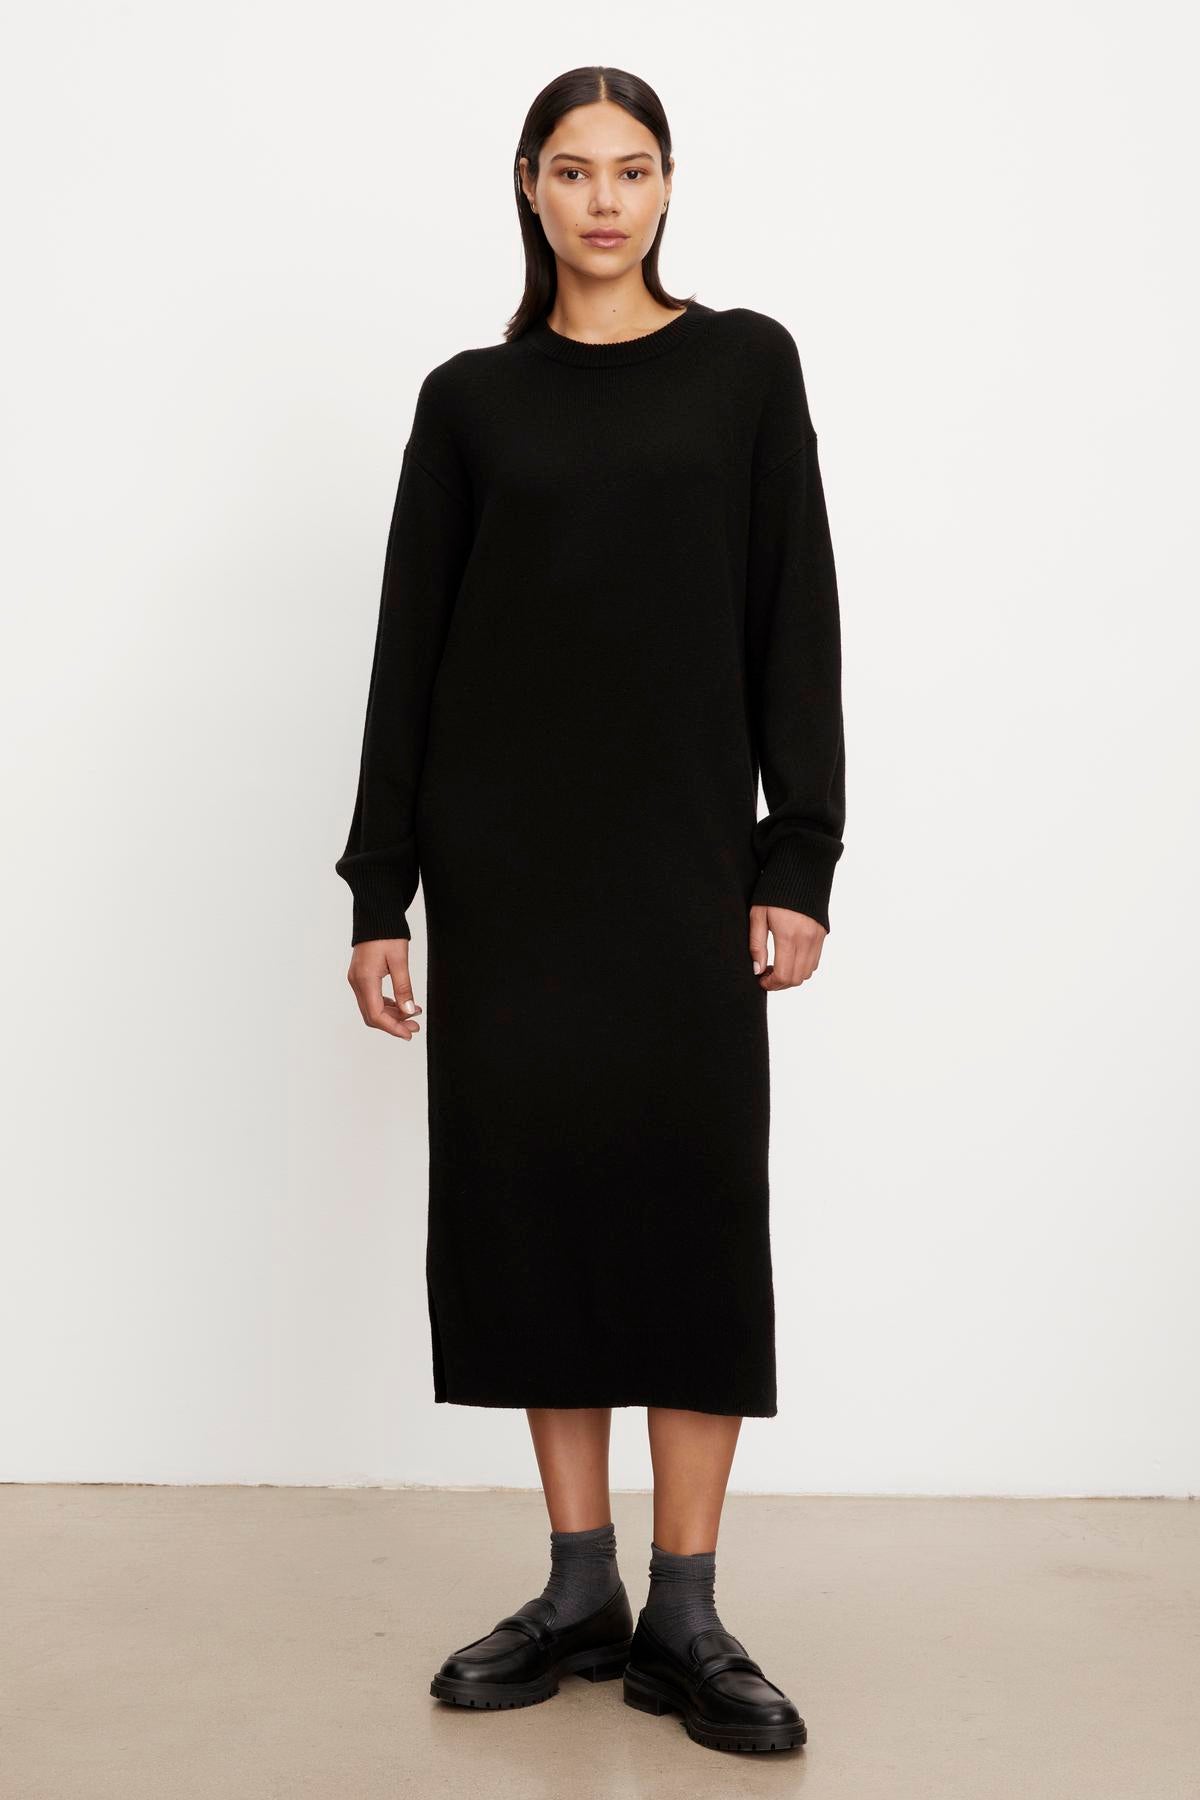   A woman in a Kaden sweater dress by Velvet by Graham & Spencer with a crew neckline and black loafers standing against a plain white background. 